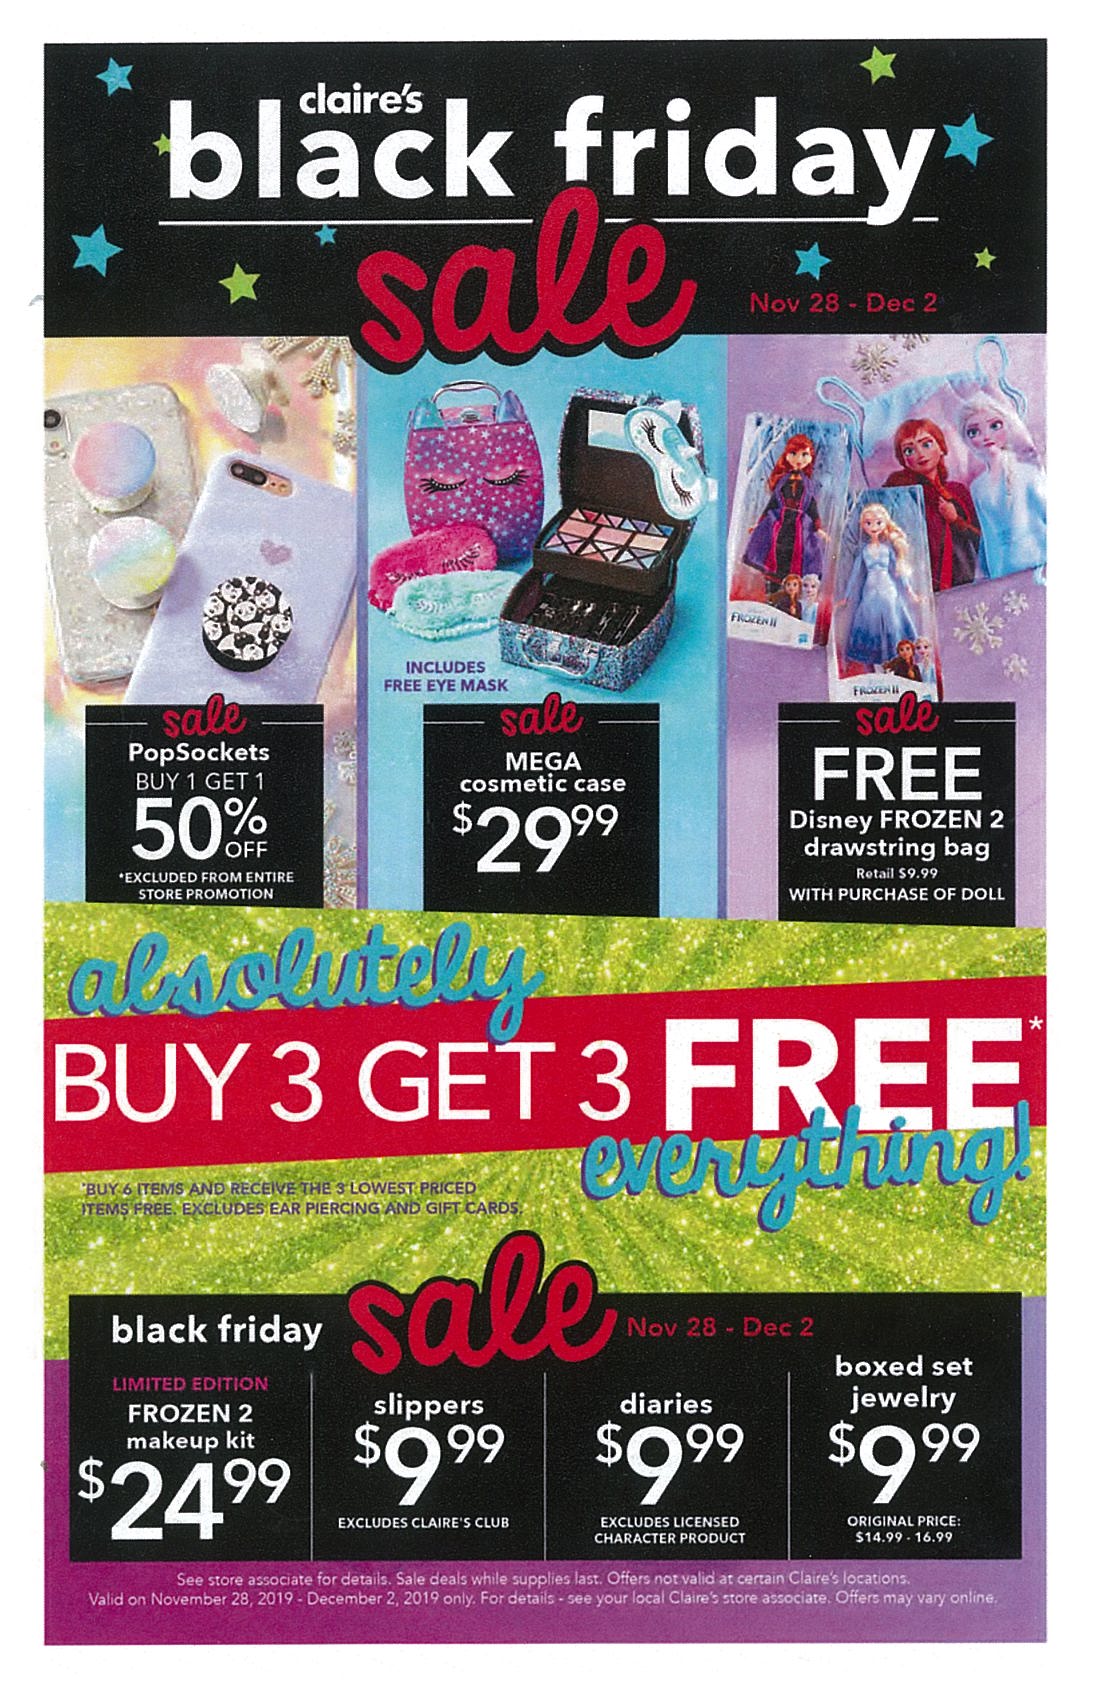 Claire's Black Friday Sale! Holyoke Mall